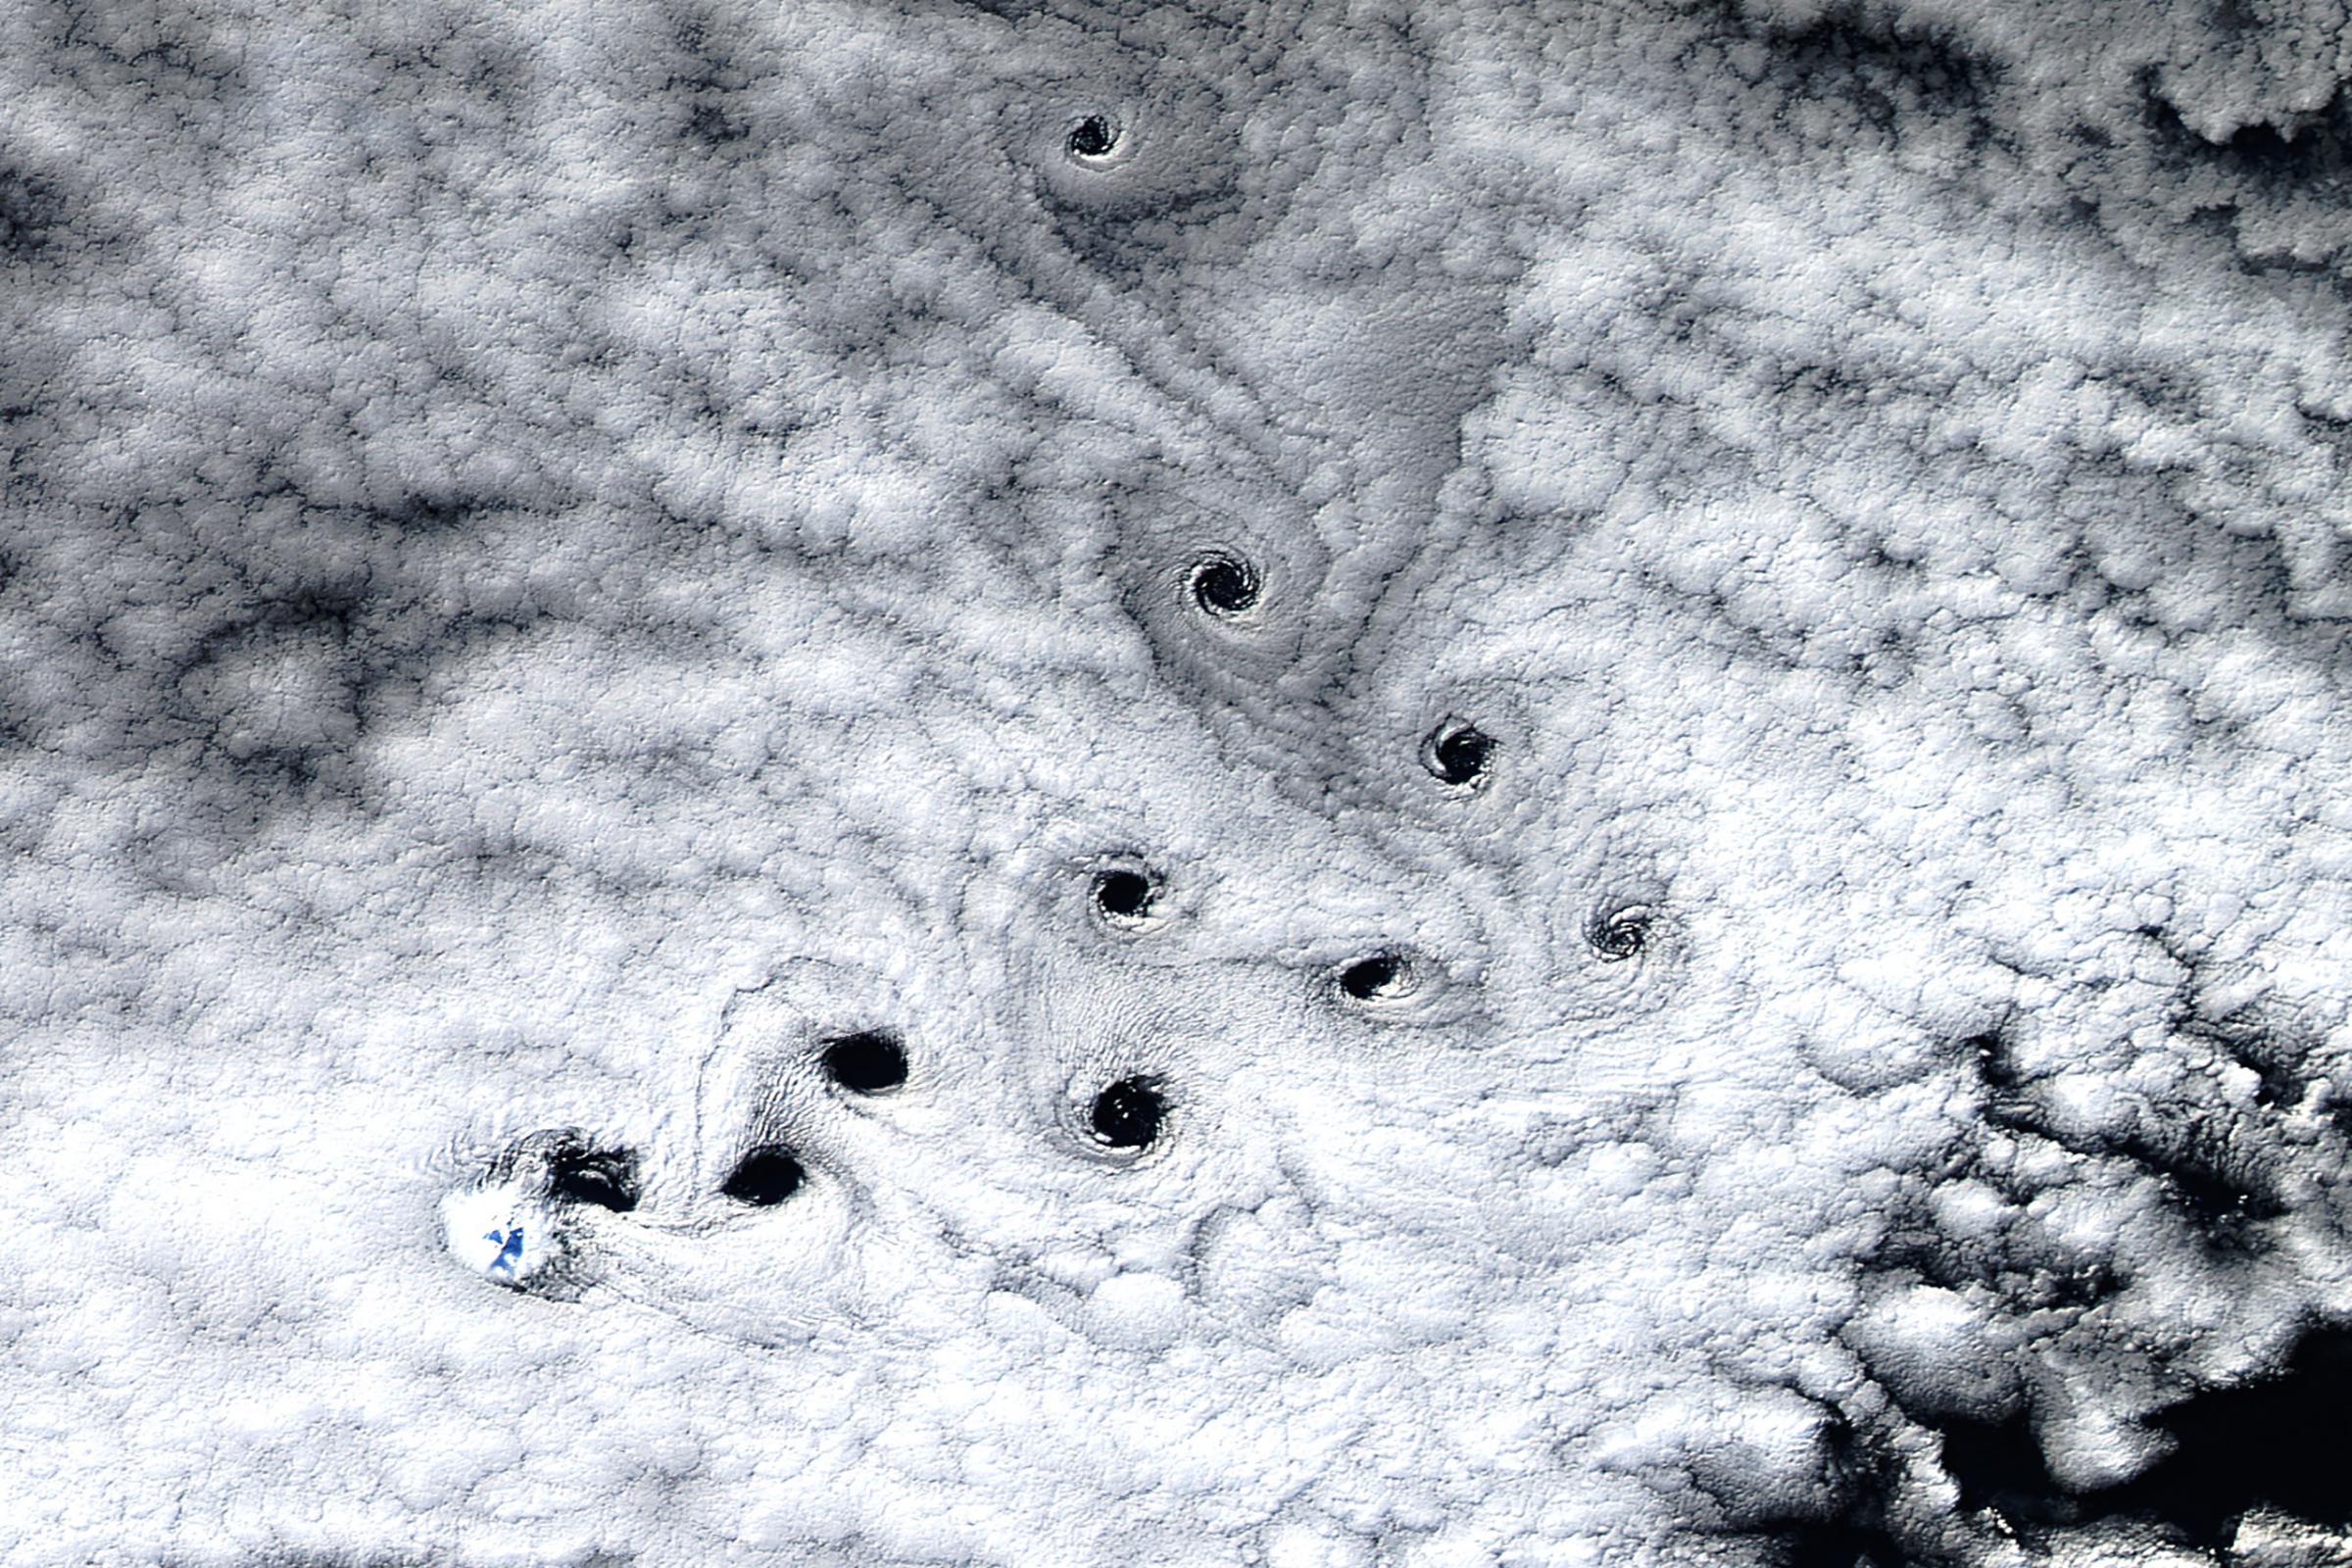 When the Operational Land Imager (OLI) on Landsat 8 captured this image of Heard Island, just the tip of Mawson Peak—the highest point on the island—was visible through the sheet of marine stratocumulus clouds swirling over this part of the Furious Fifties. Though just 2,745 meters (9,006 feet), the mountain was tall enough to stir up several cloud vortices that swirled downwind like eddies in a fast-moving river, May 3, 2016.